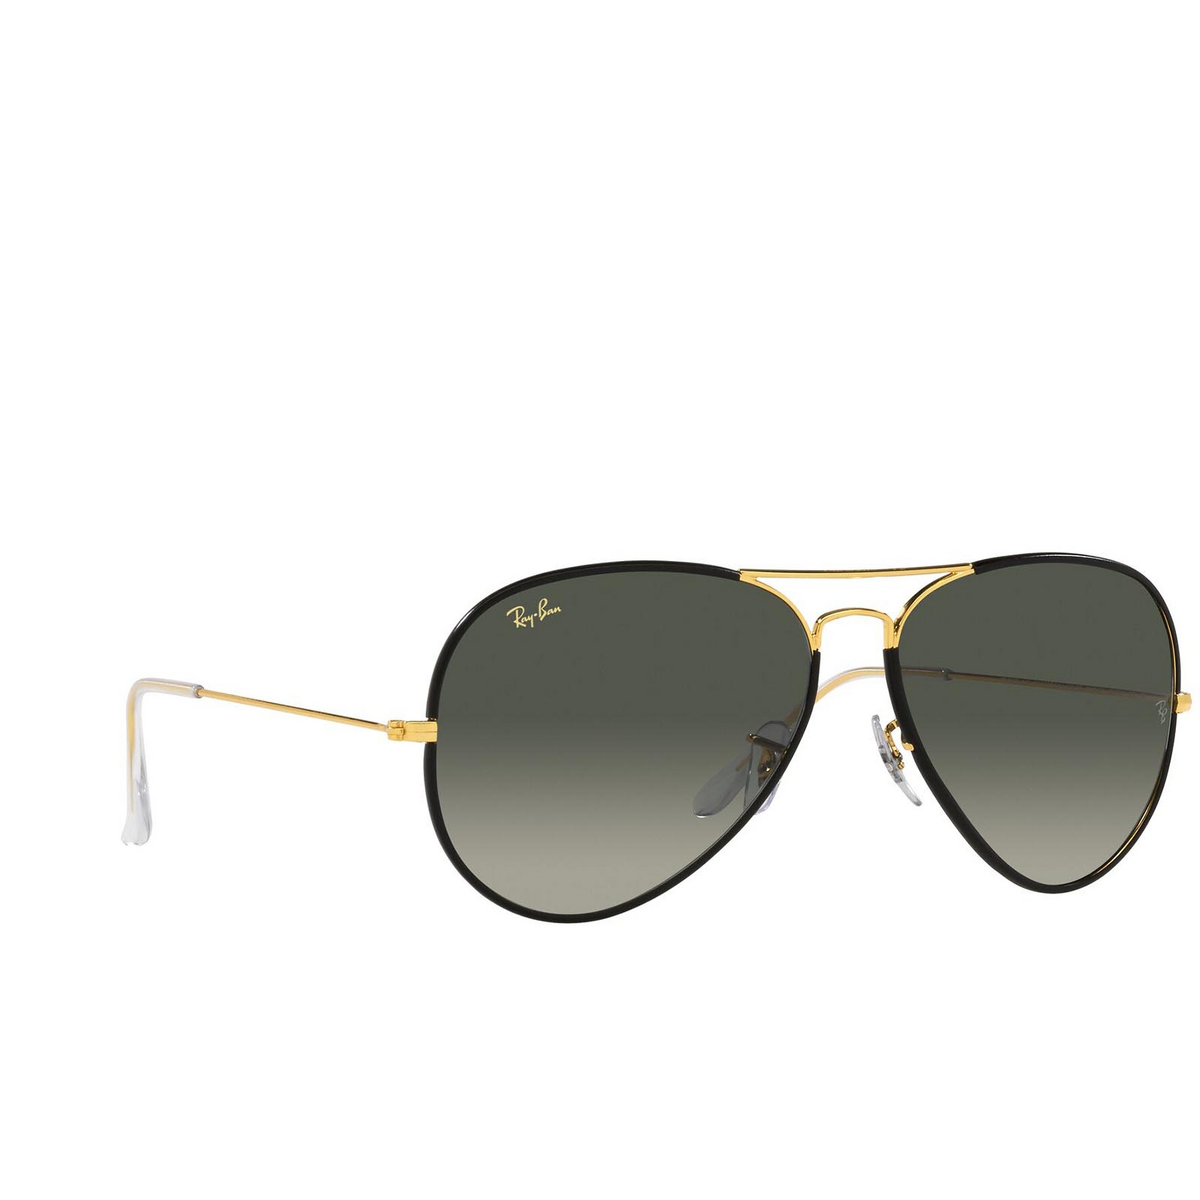 Ray-Ban AVIATOR FULL COLOR Sunglasses 919671 Black on Legend Gold - three-quarters view